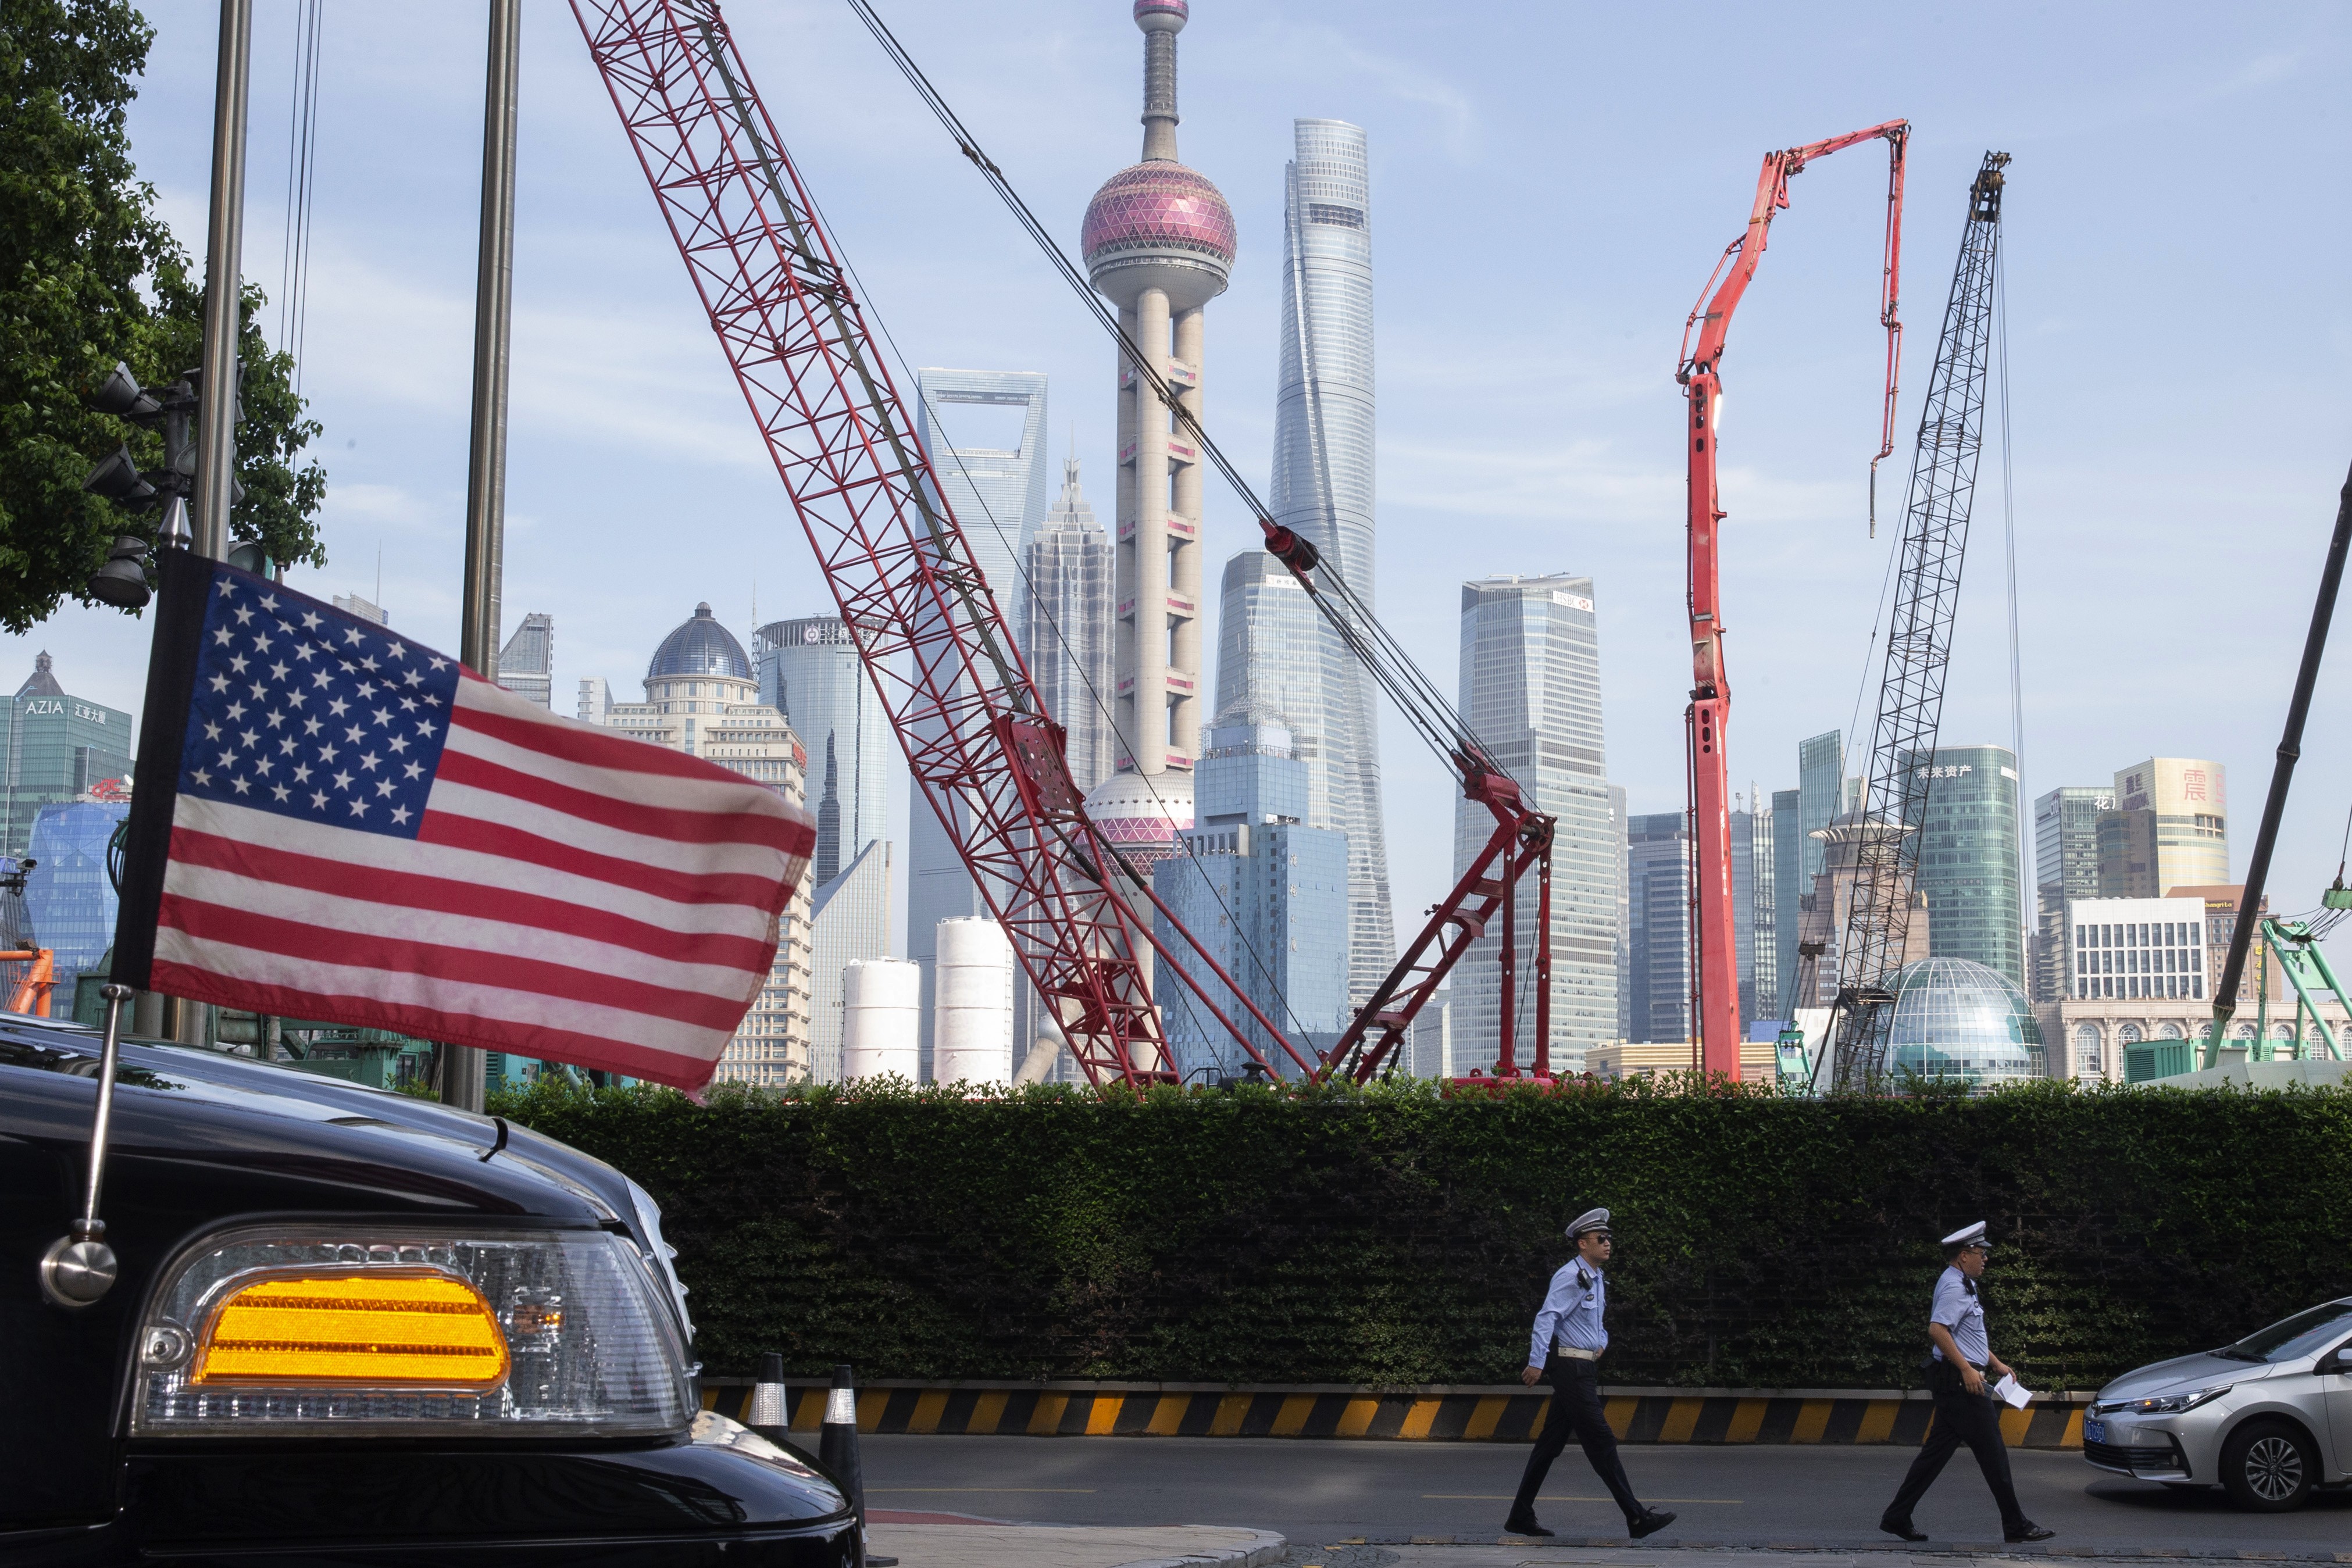 Although a phase one trade deal has been agreed, there is rising fear in the US over China’s ambitions to become a global leader in strategic technologies, such as AI and 5G. Photo: AP